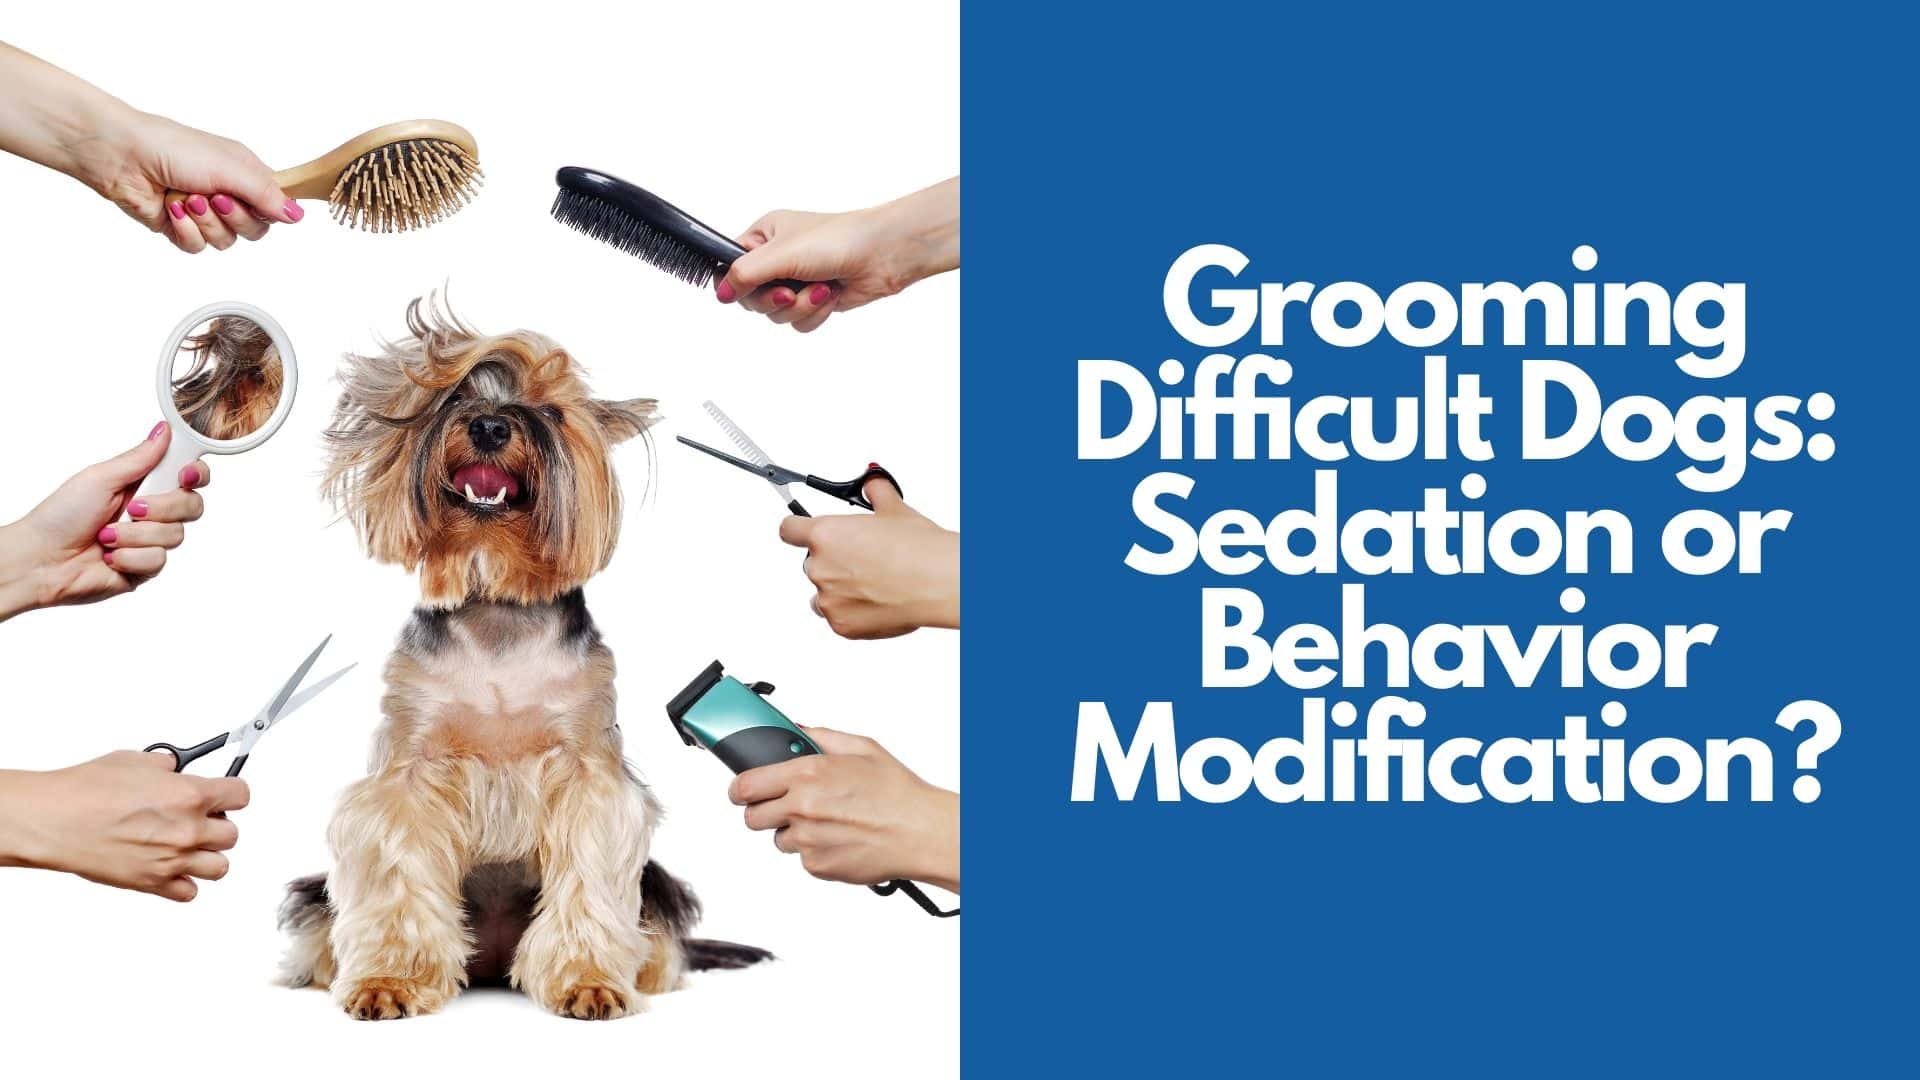 Grooming Difficult Dogs Sedation or Behavior Modification